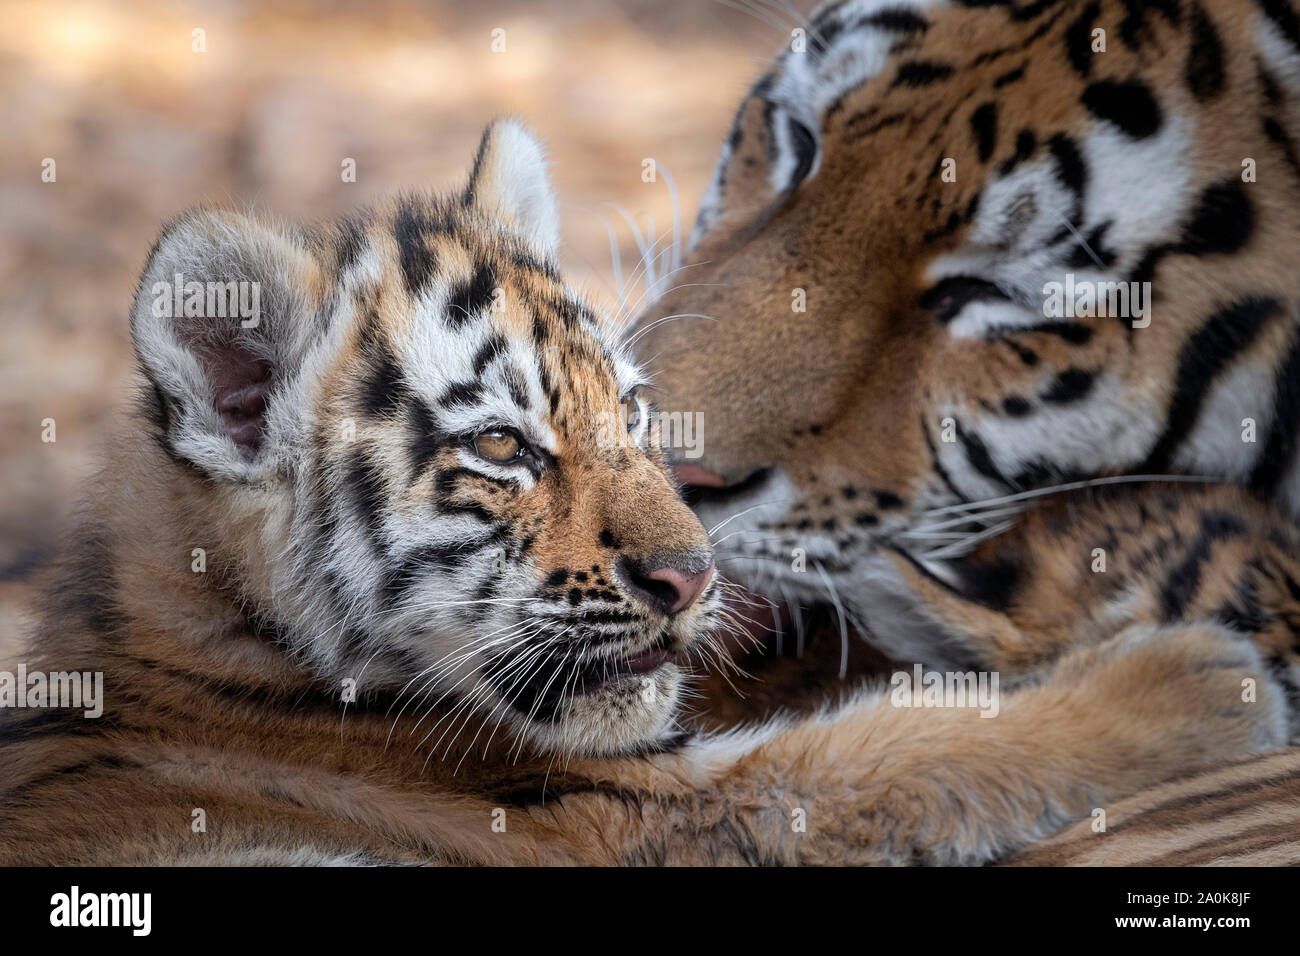 Tiger Mum High Resolution Stock Photography And Images Alamy